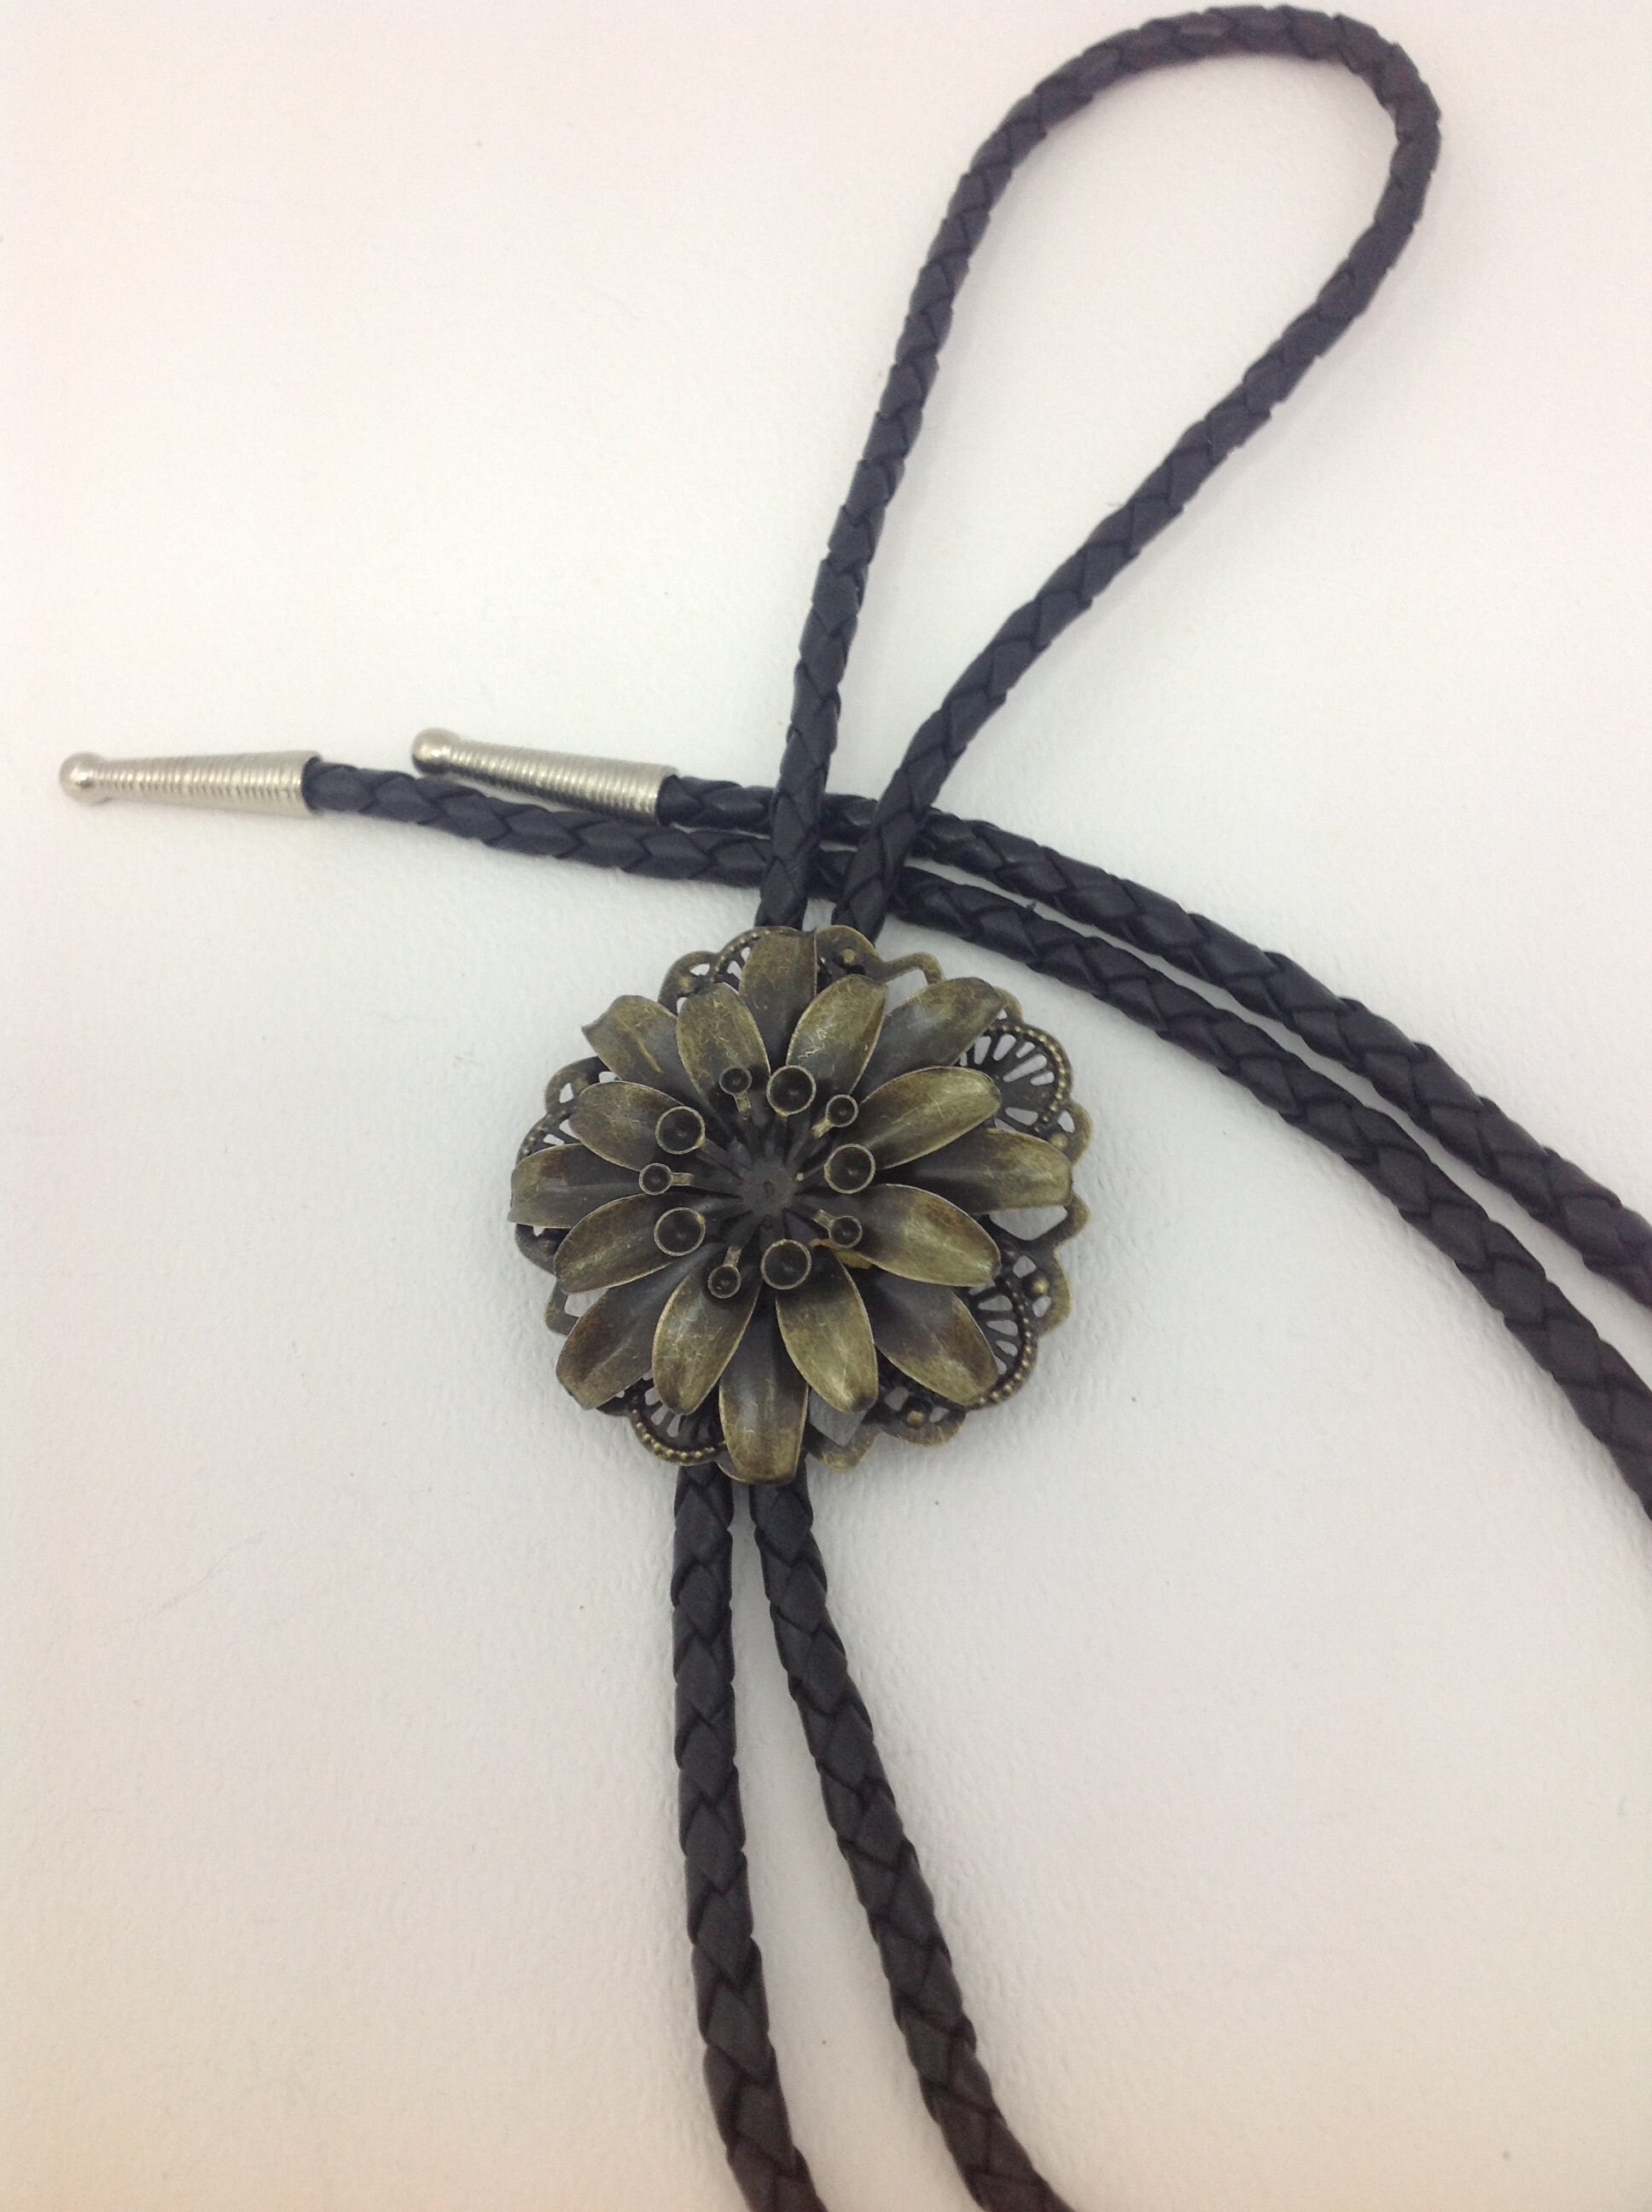 Bolo Tie Flower Style Bolo Tie Necklace Bootlace Tie - Etsy